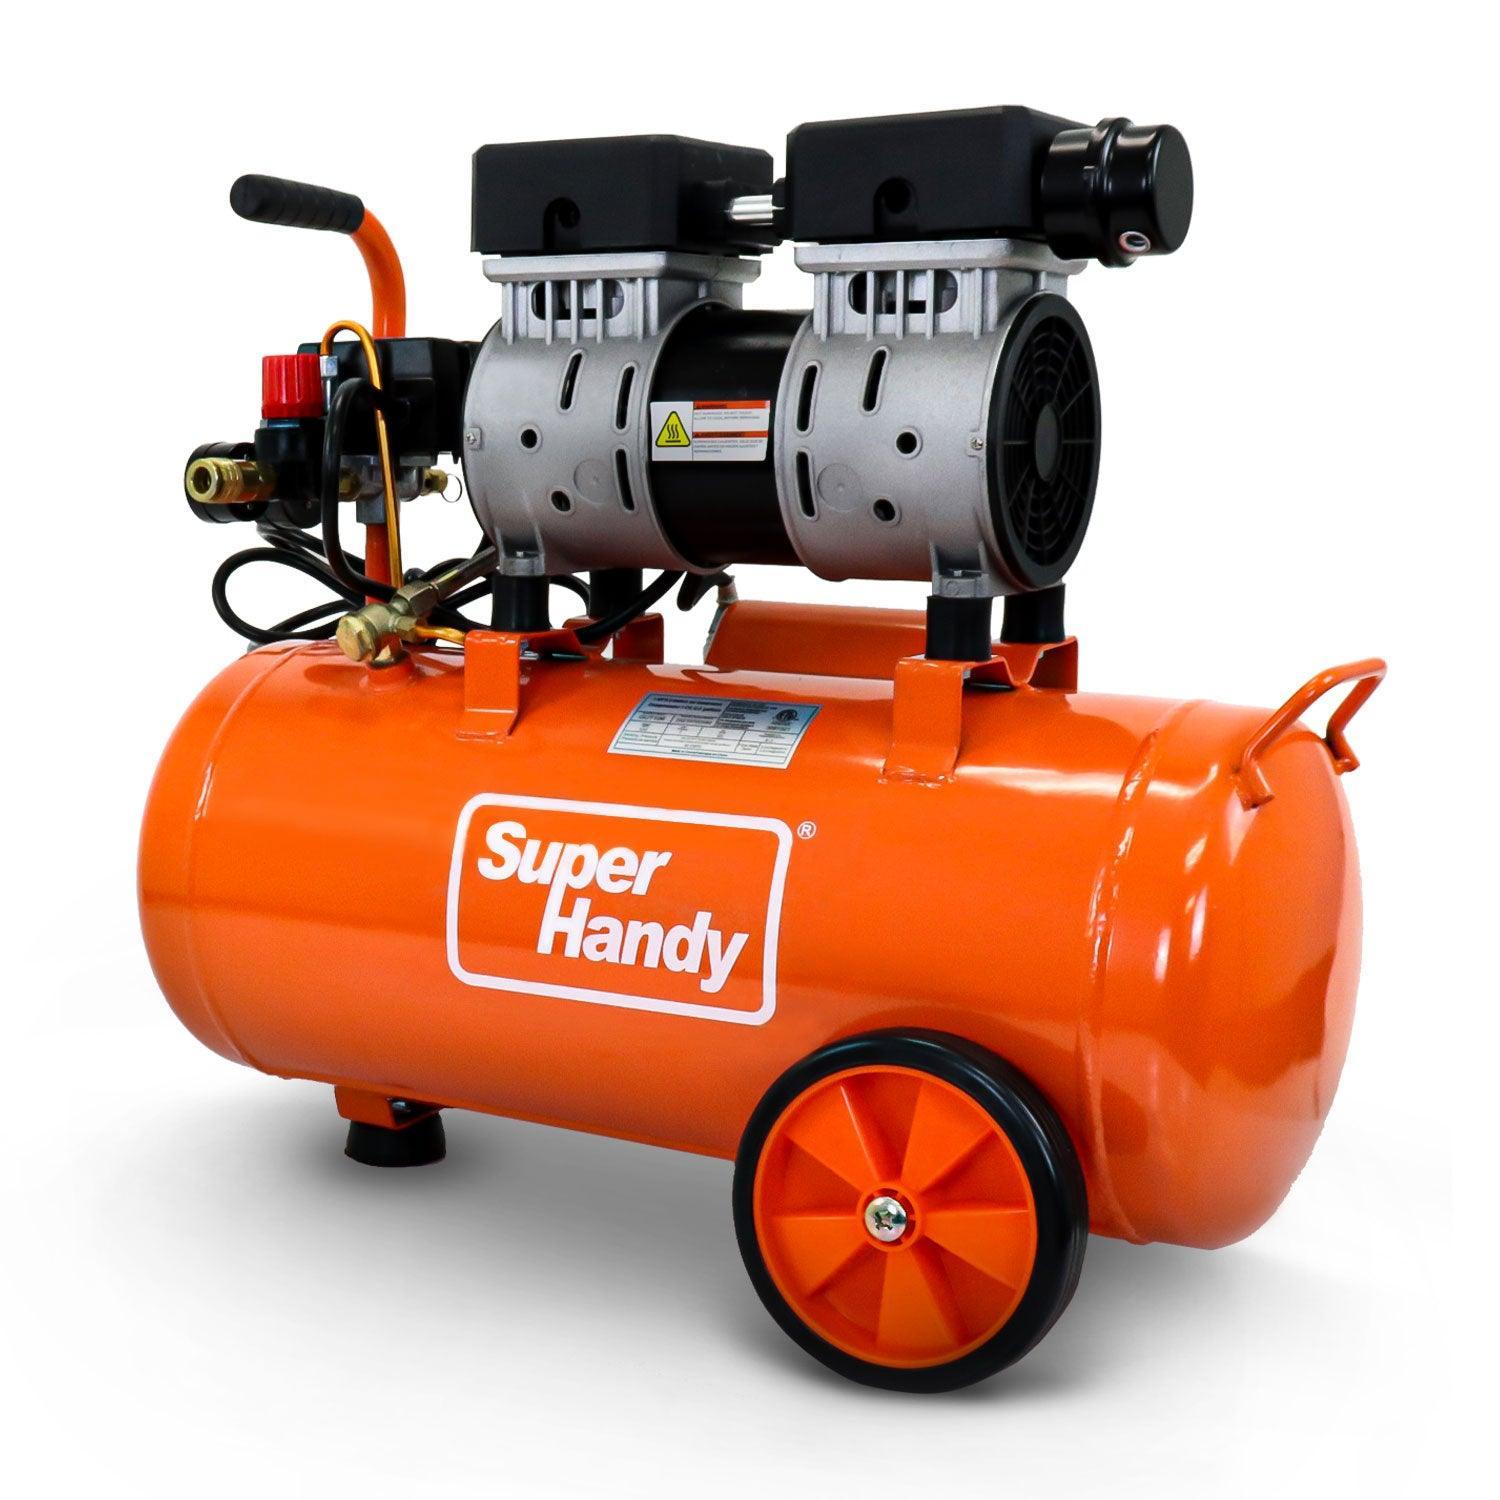 SuperHandy Electric Air Compressor - 120V Corded, 6.3 Gal, 120PSI Max Pressure Output - DIY Tools by GreatCircleUS